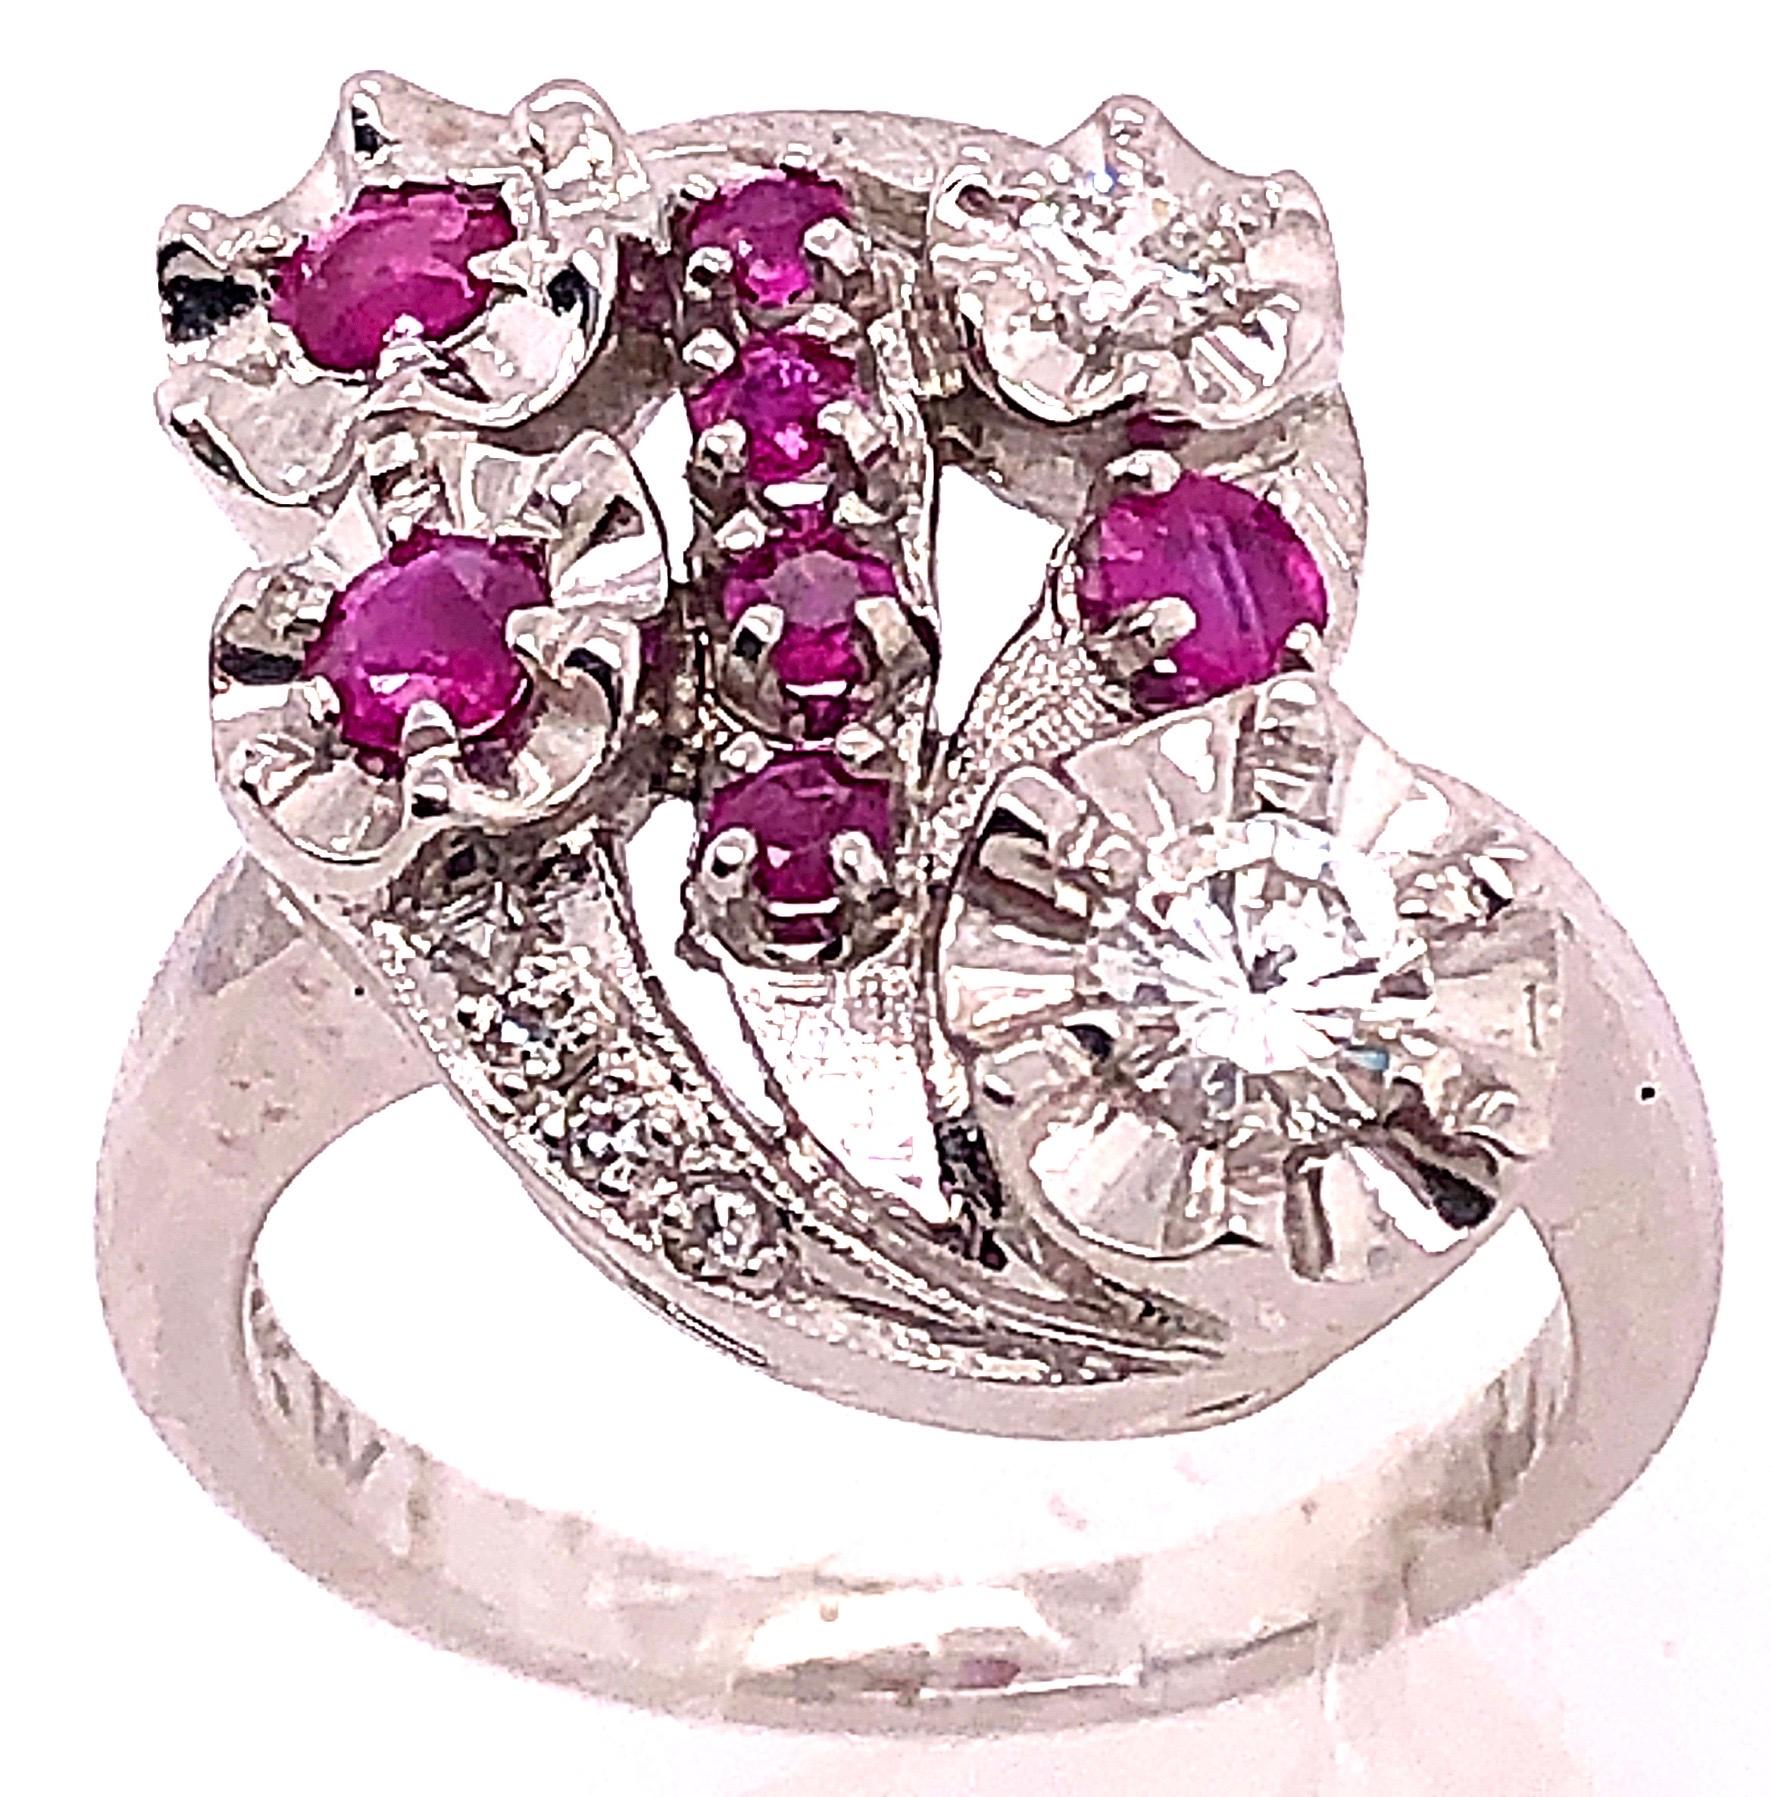 14 Karat White Gold Ruby And Diamond Cocktail Ring
7 piece round rubies
0.33 total diamond weight.
Size 6
Height: 25 mm Width: 18 mm
8 grams total weight.
